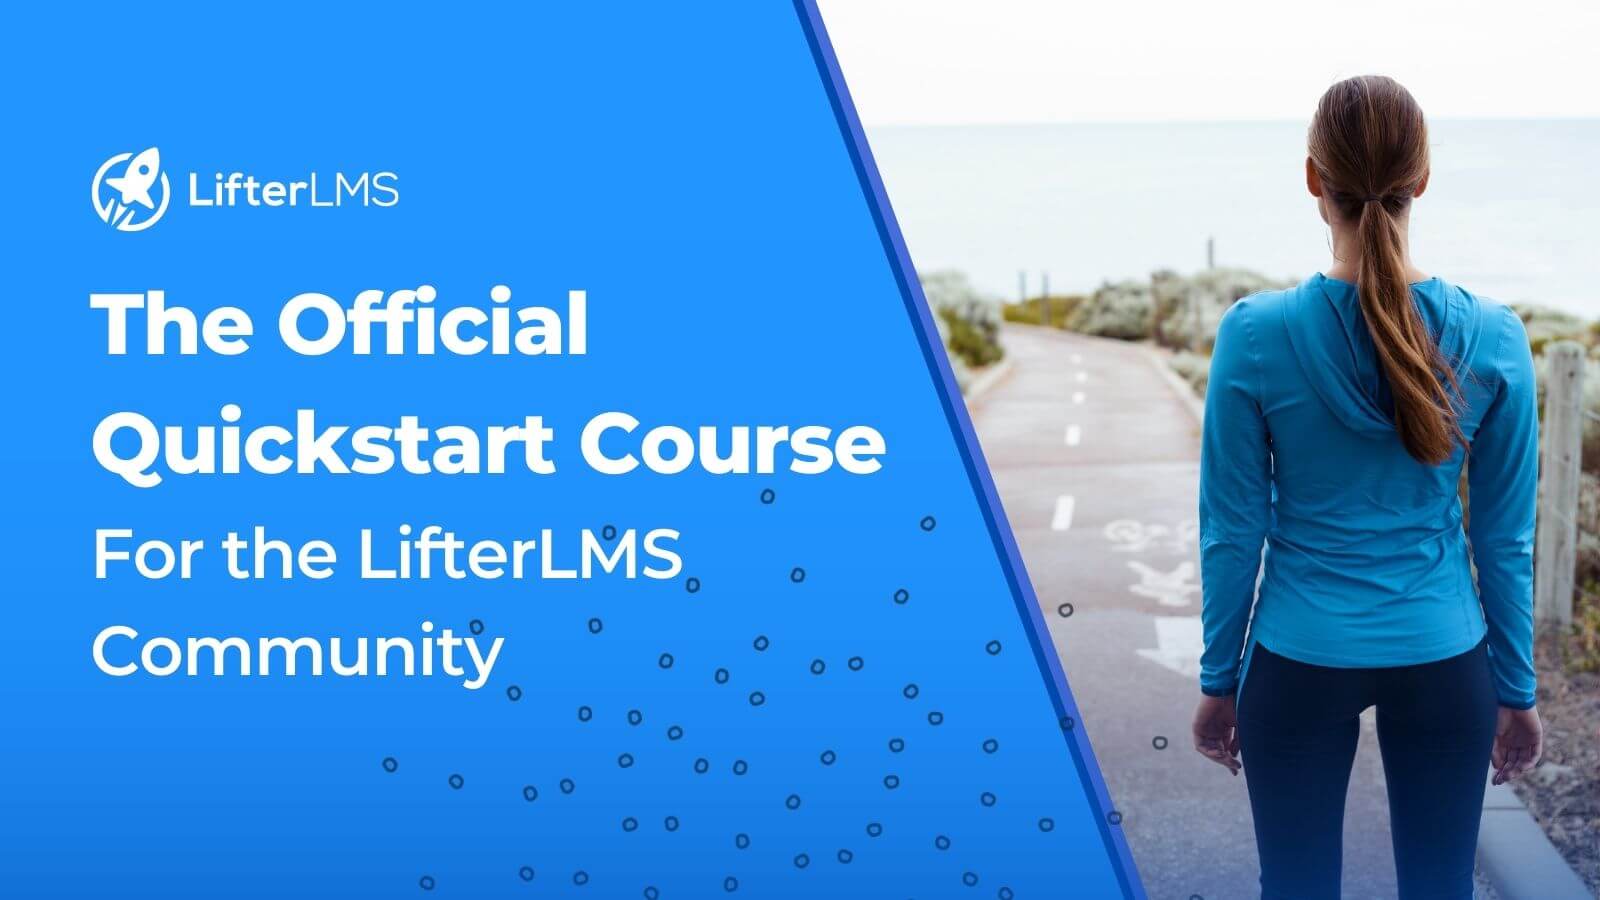 The Official Quickstart Course for the LifterLMS Community